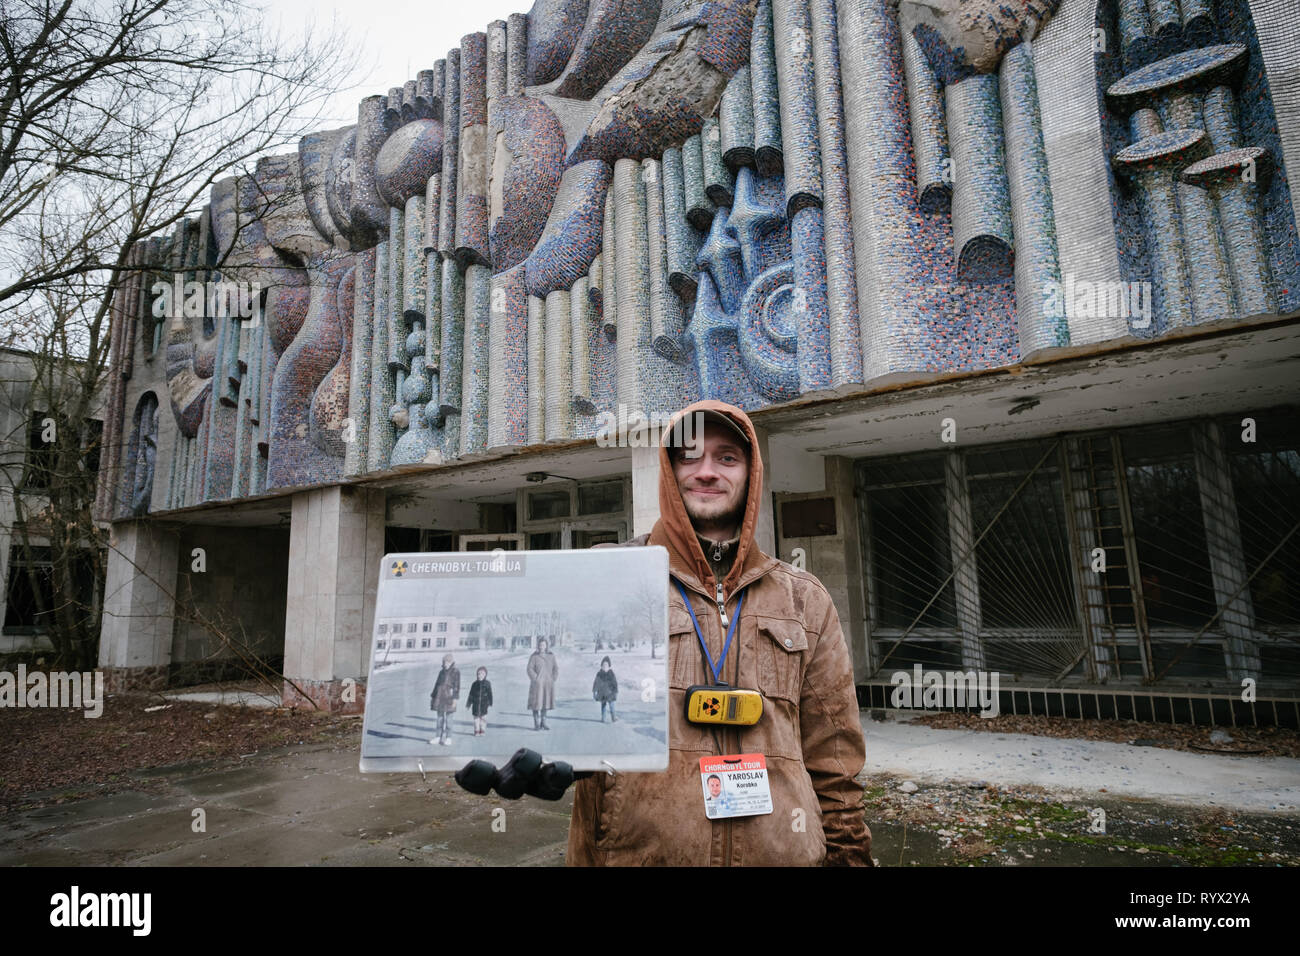 The abandoned city of Pripyat, Chernobyl nuclear power plant disaster exclusion zone, Ukraine. Stock Photo